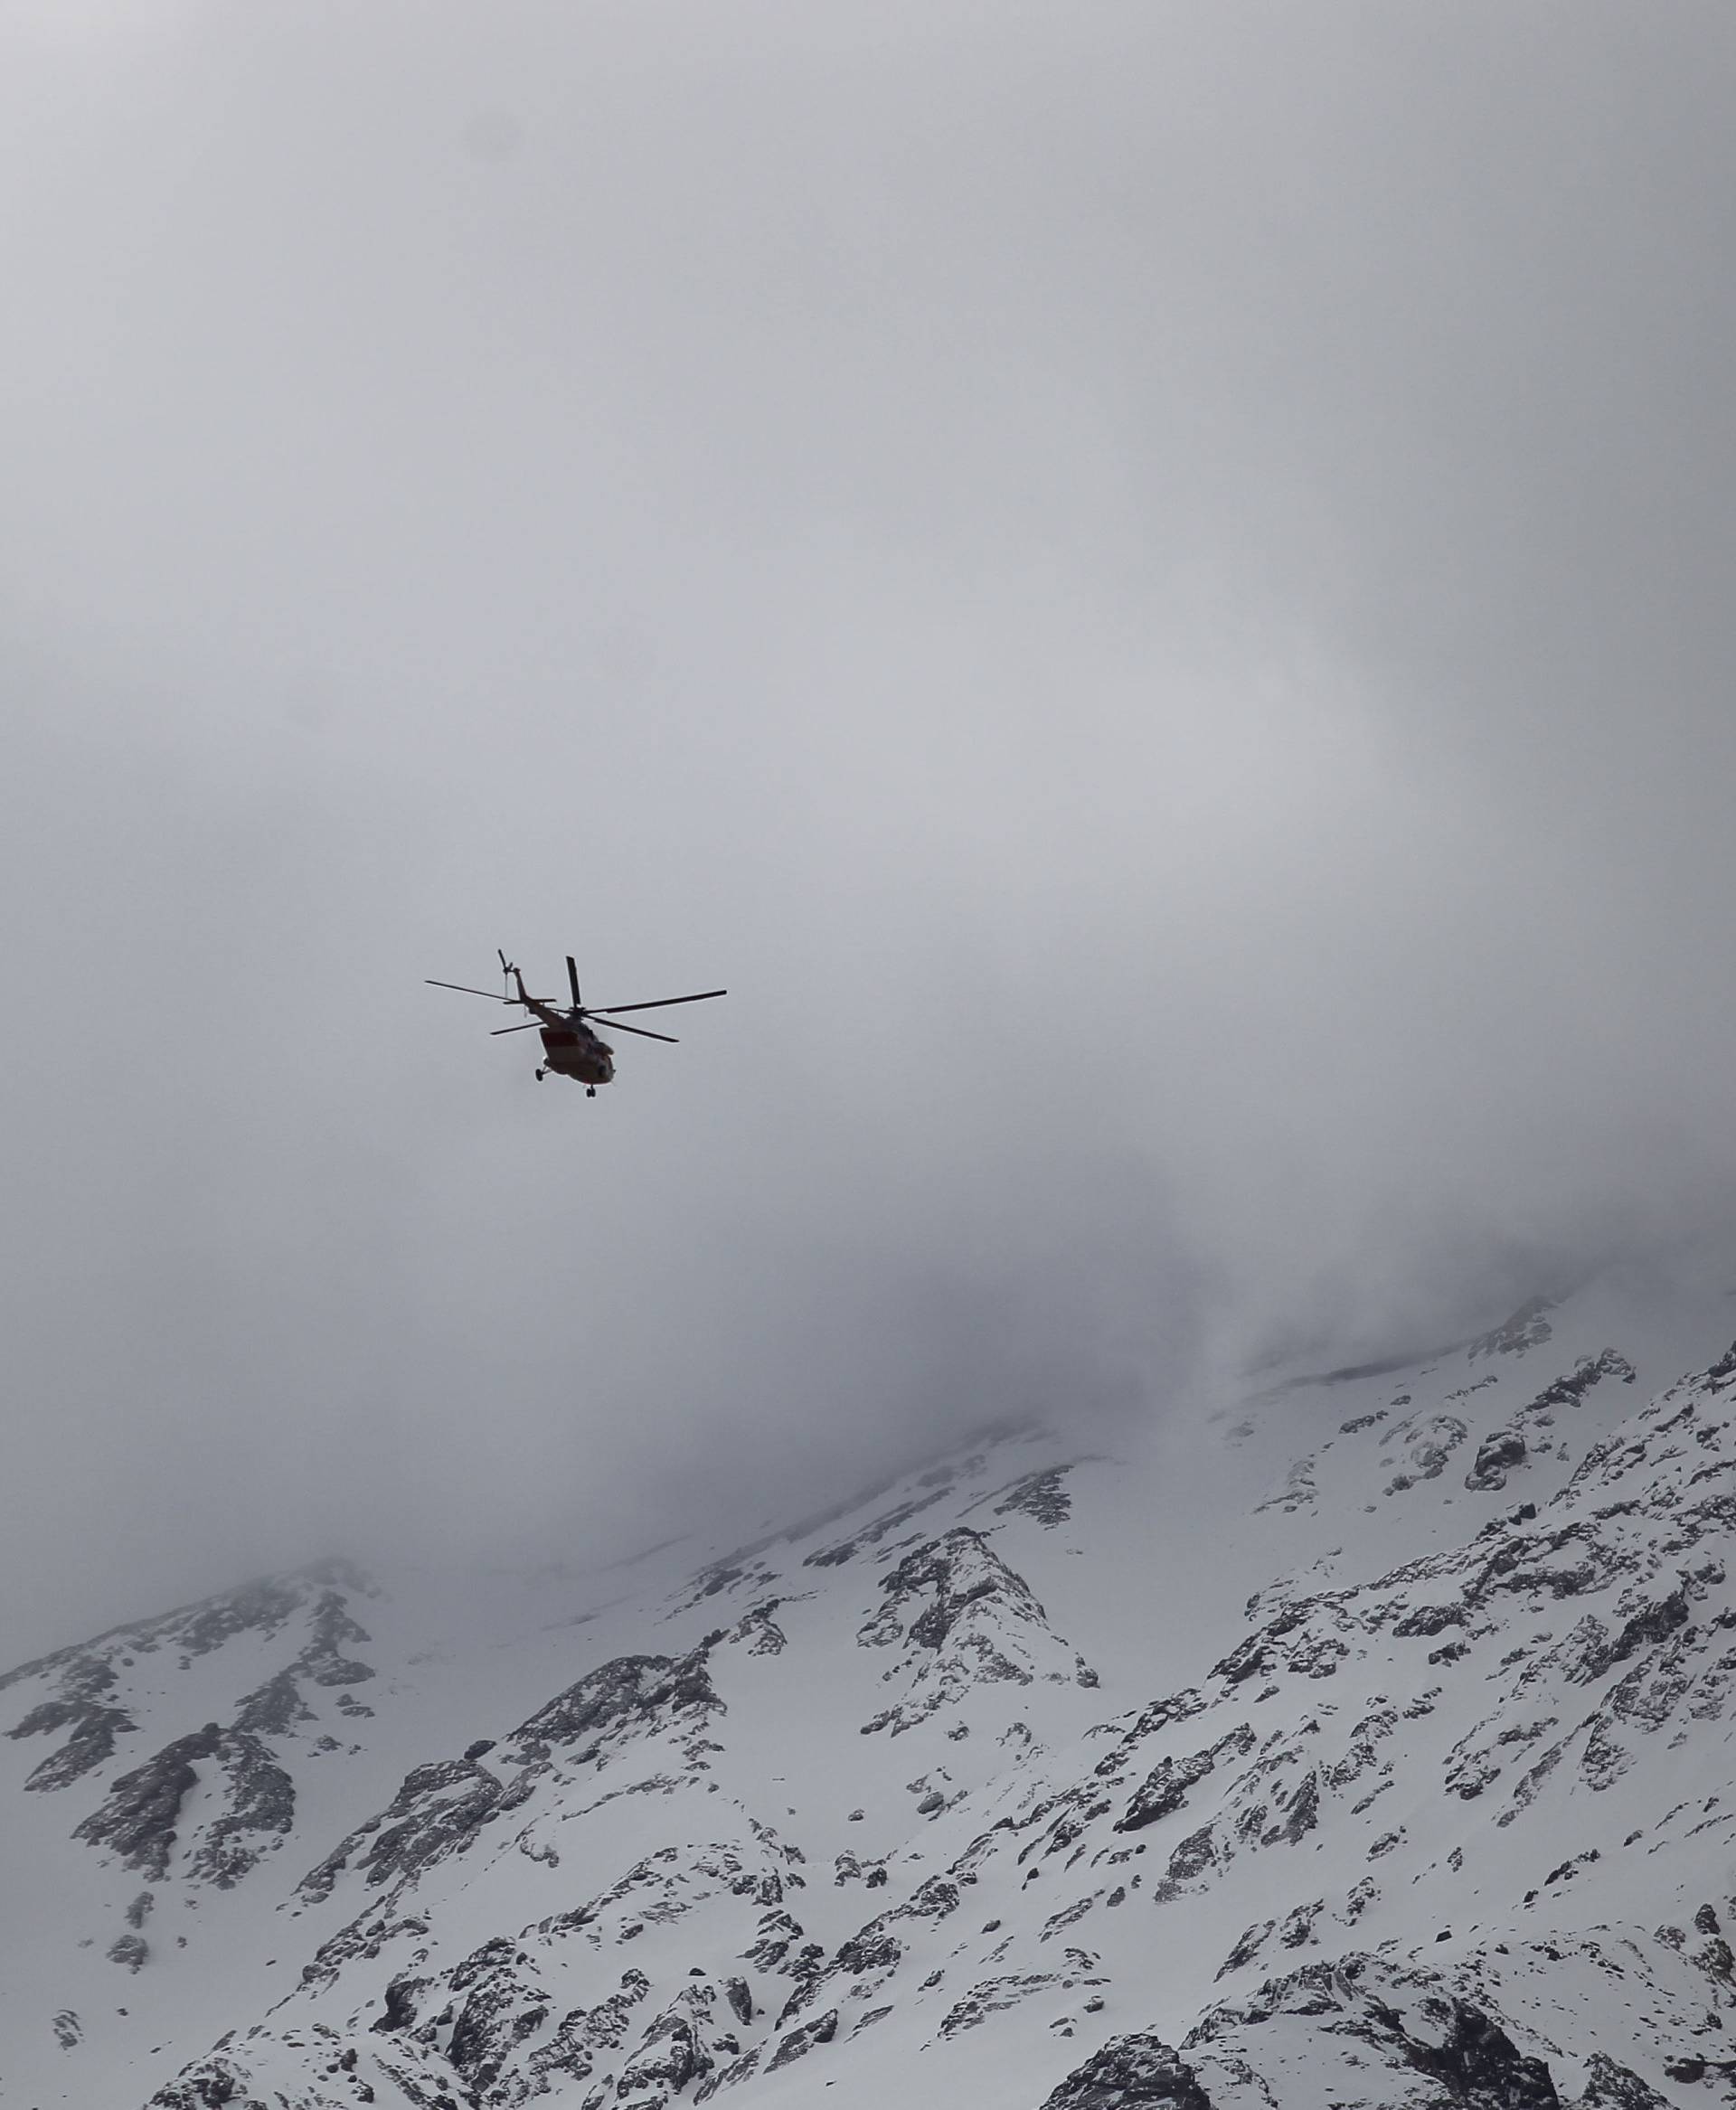 Emergency and rescue helicopter searches for the plane that crashed in a mountainous area of central Iran